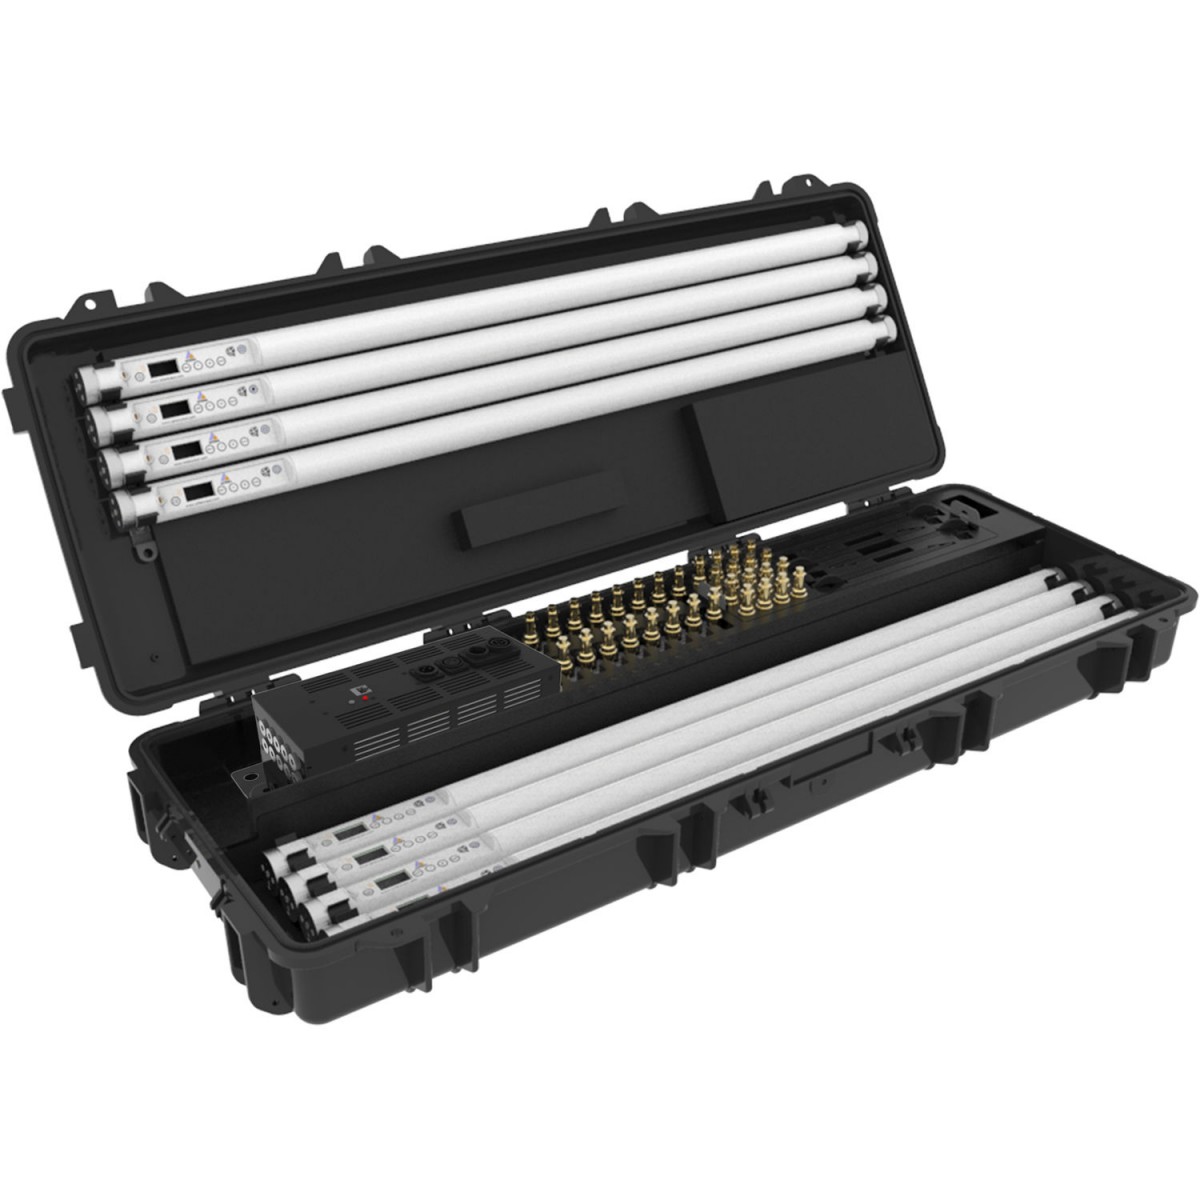 Astera FP1 Set of 8 Titan Tubes with Charging Case